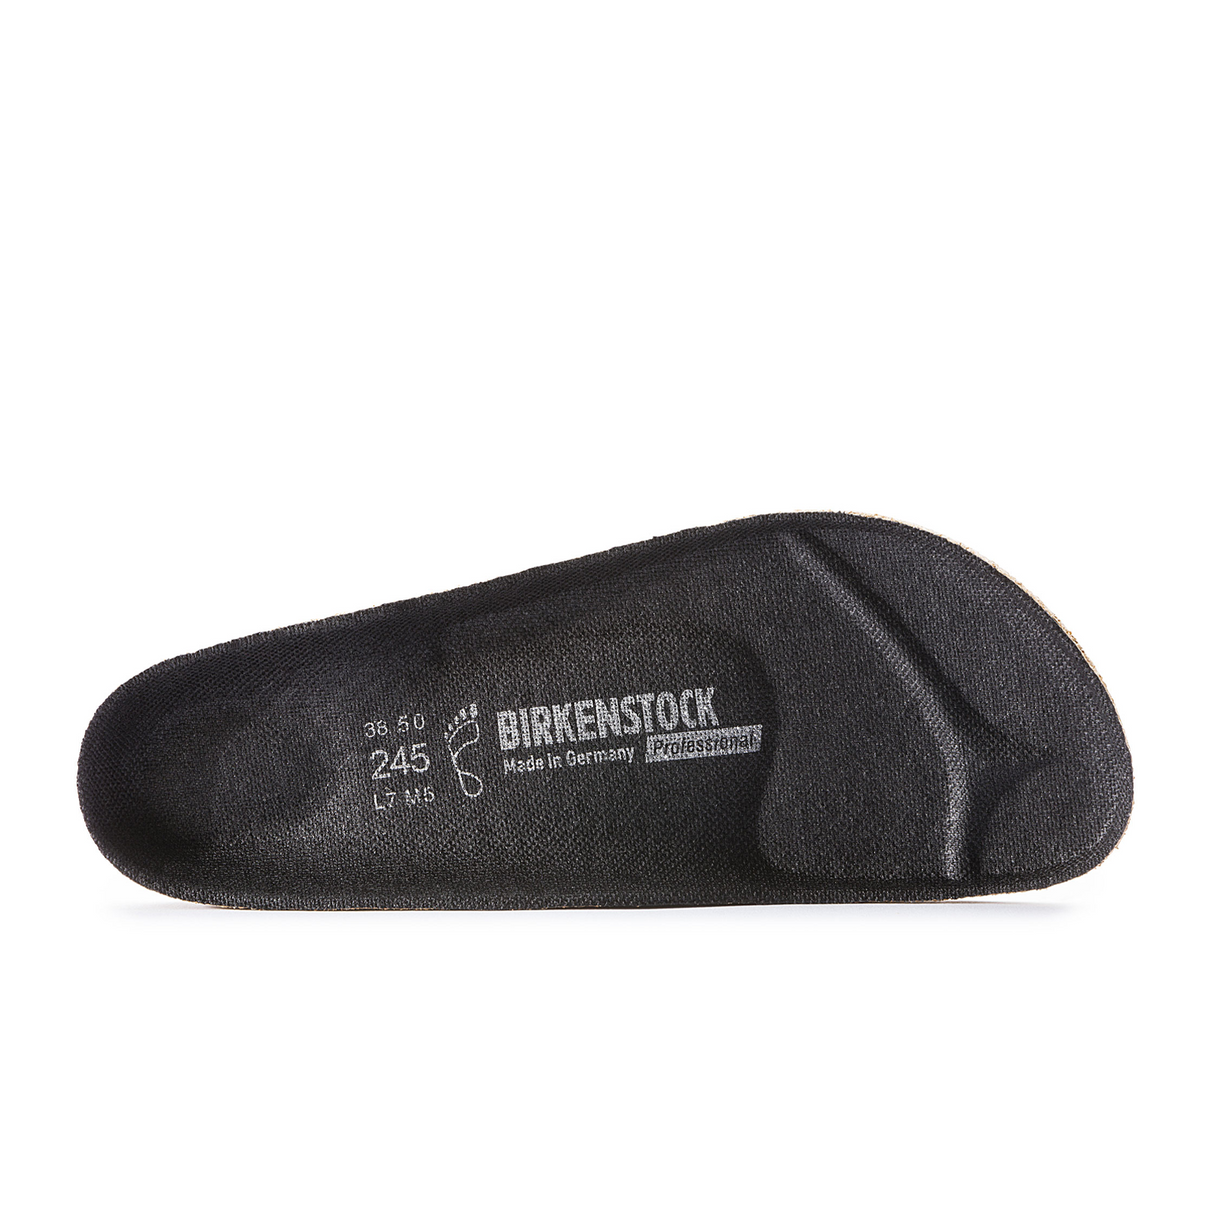 Birkenstock Super-Birki Replacement Footbed (Unisex) - Black Accessories - Orthotics/Insoles - Full Length - The Heel Shoe Fitters